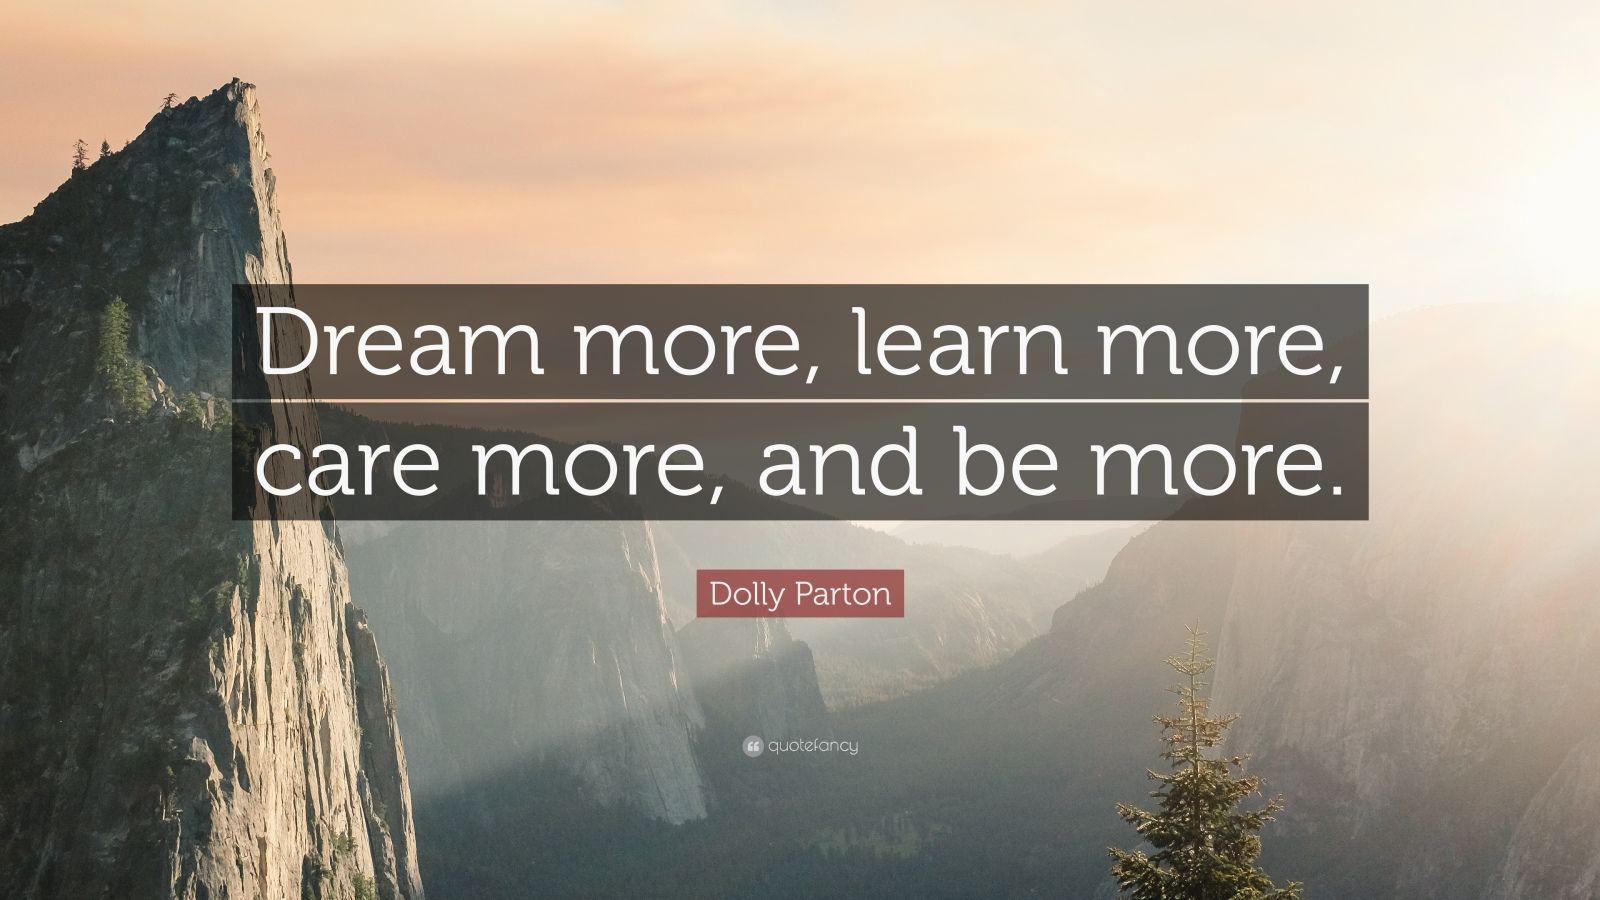 Dolly Parton Quote: “Dream more, learn more, care more, and be more.”